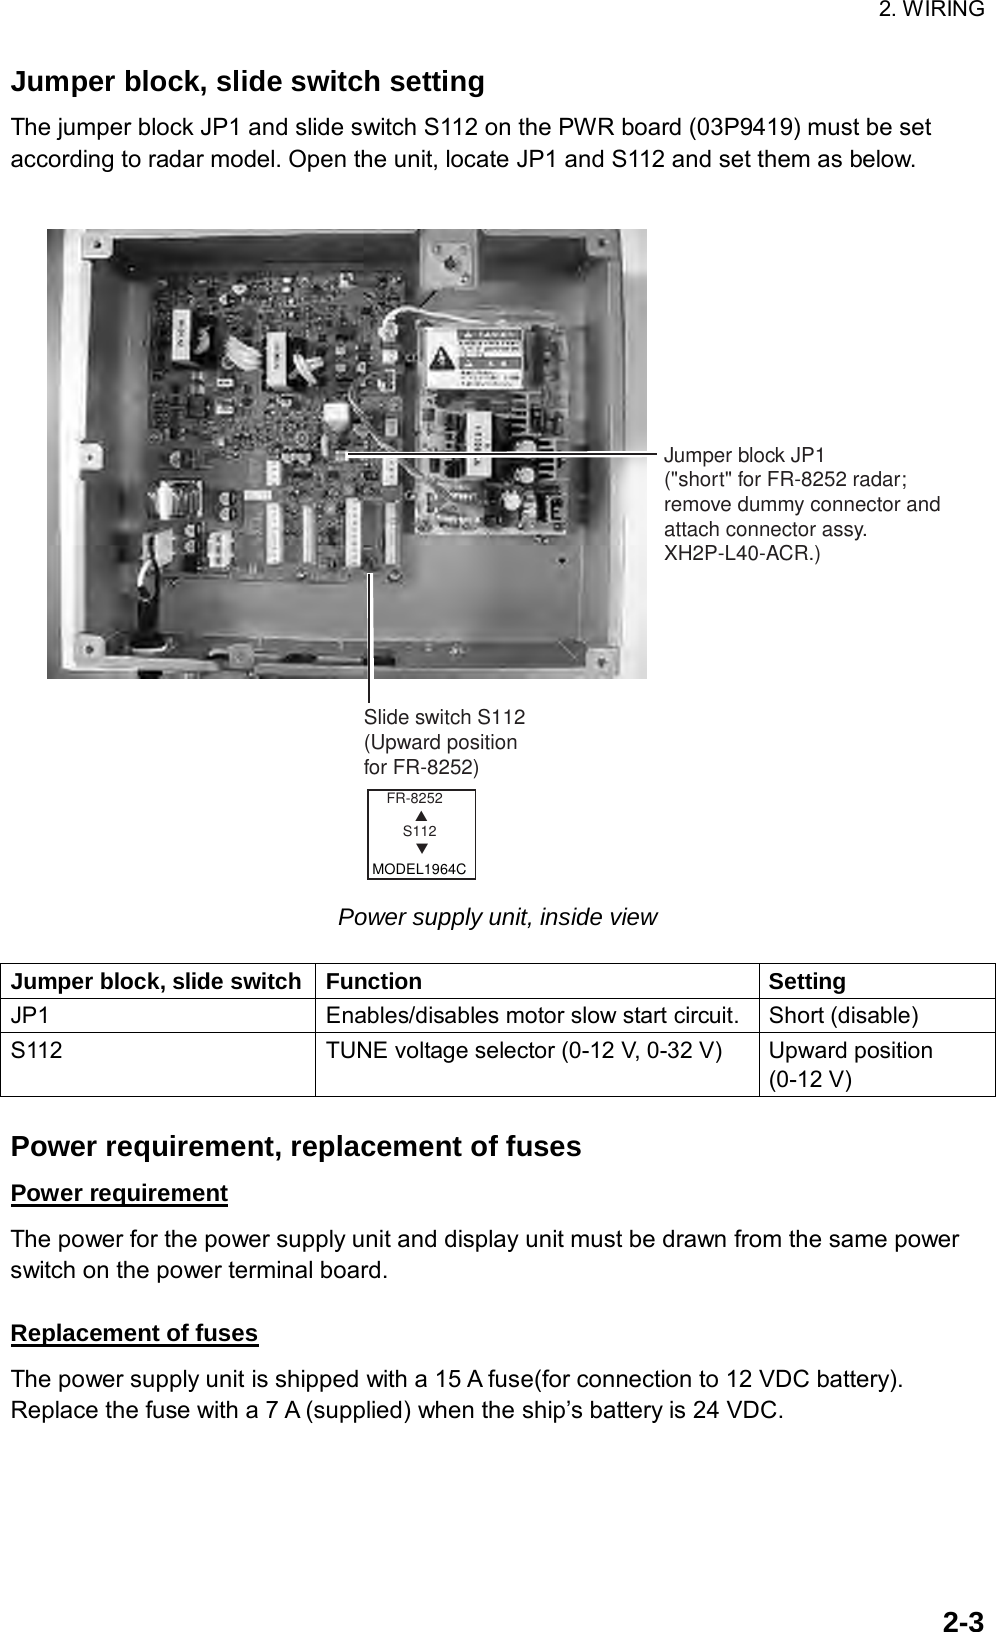 2. WIRING  2-3Jumper block, slide switch setting The jumper block JP1 and slide switch S112 on the PWR board (03P9419) must be set according to radar model. Open the unit, locate JP1 and S112 and set them as below.      FR-8252           S        S112           TMODEL1964CJumper block JP1(&quot;short&quot; for FR-8252 radar;remove dummy connector and attach connector assy. XH2P-L40-ACR.)Slide switch S112(Upward positionfor FR-8252) Power supply unit, inside view  Jumper block, slide switch  Function  Setting JP1  Enables/disables motor slow start circuit.  Short (disable) S112  TUNE voltage selector (0-12 V, 0-32 V)  Upward position (0-12 V)  Power requirement, replacement of fuses Power requirement The power for the power supply unit and display unit must be drawn from the same power switch on the power terminal board.  Replacement of fuses The power supply unit is shipped with a 15 A fuse(for connection to 12 VDC battery). Replace the fuse with a 7 A (supplied) when the ship’s battery is 24 VDC. 